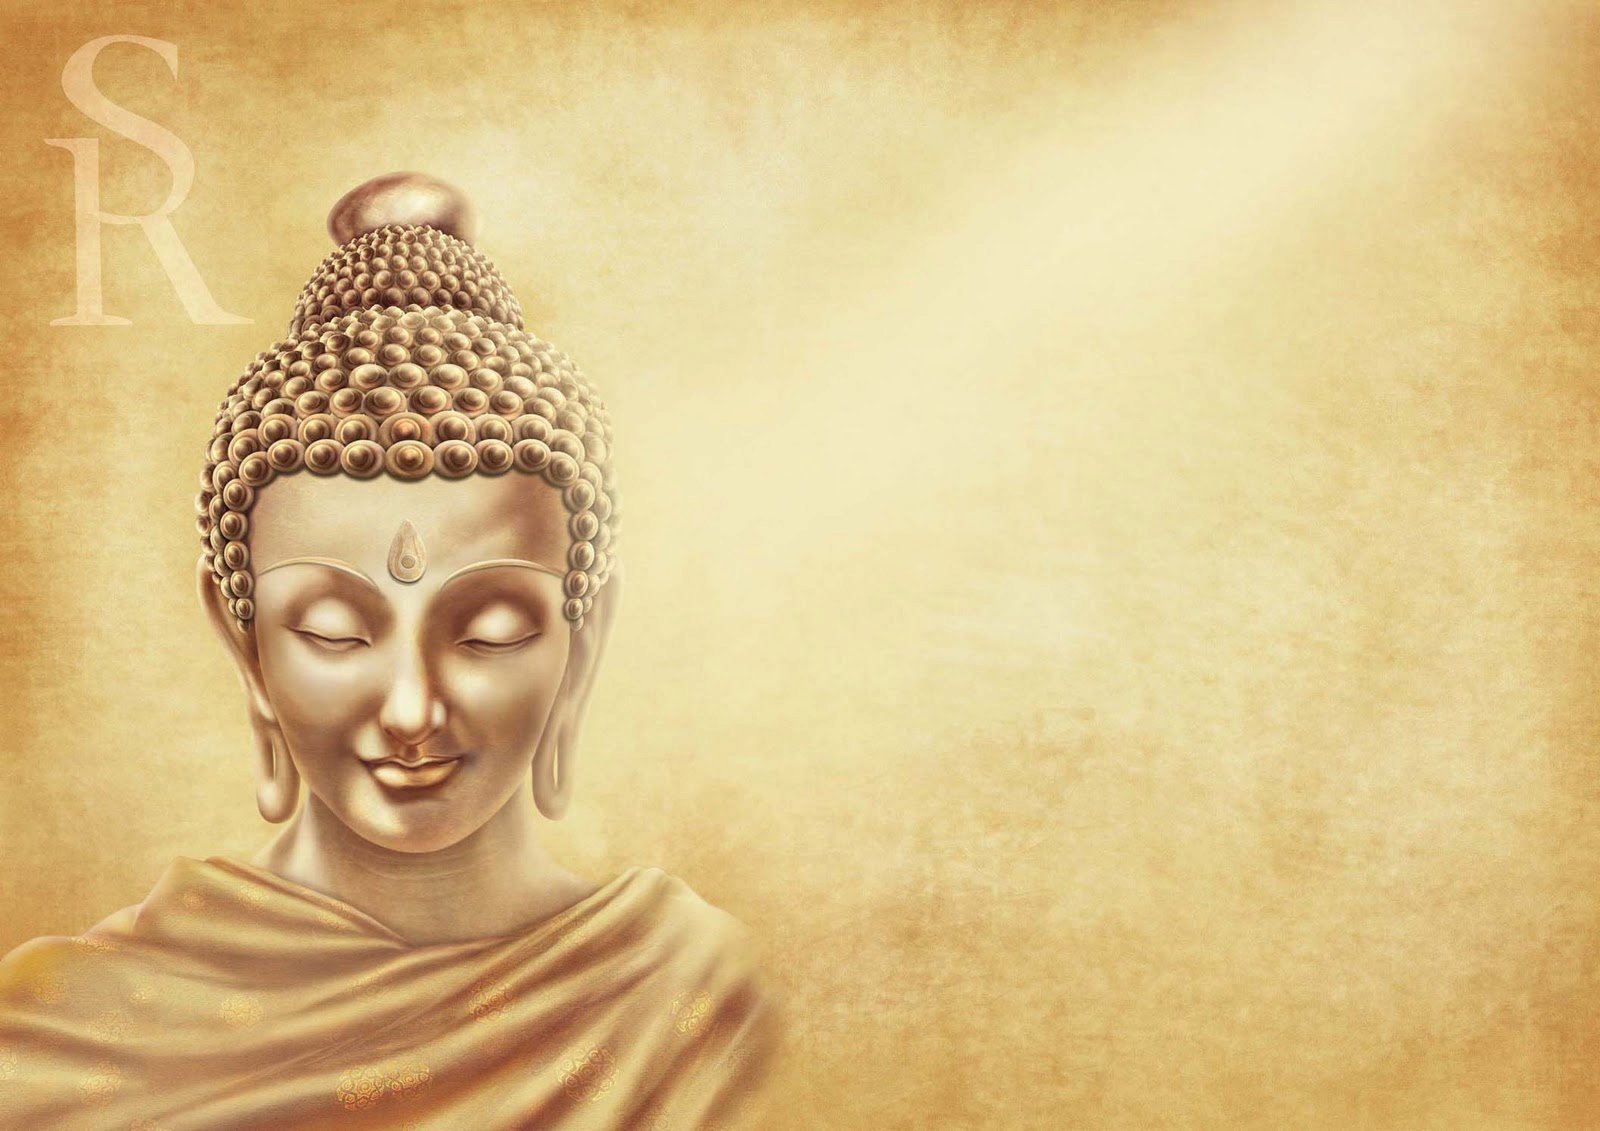 Buddha Wallpaper pictures HD yellow background